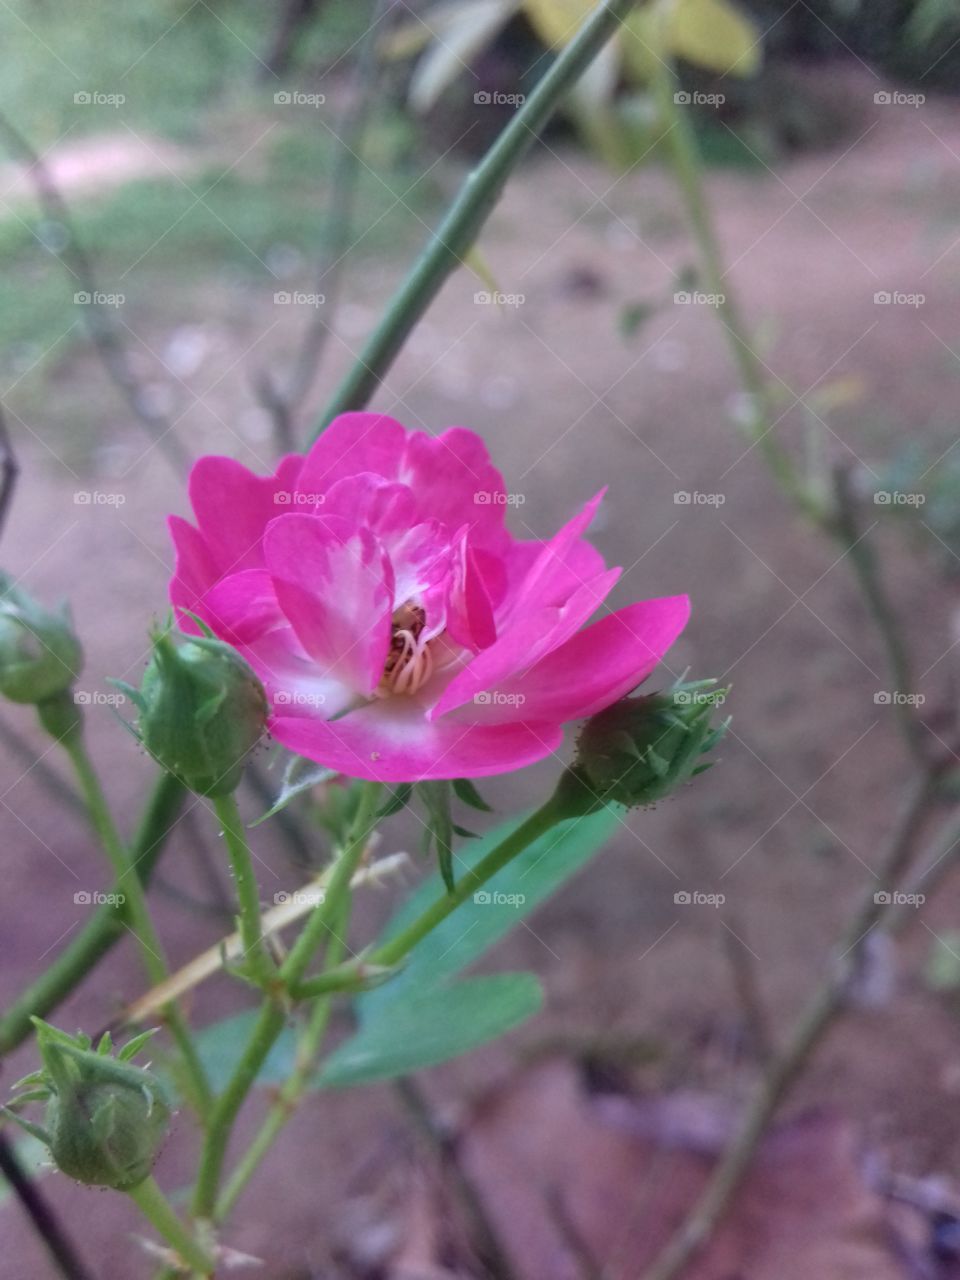 baby rose flower with baby buds